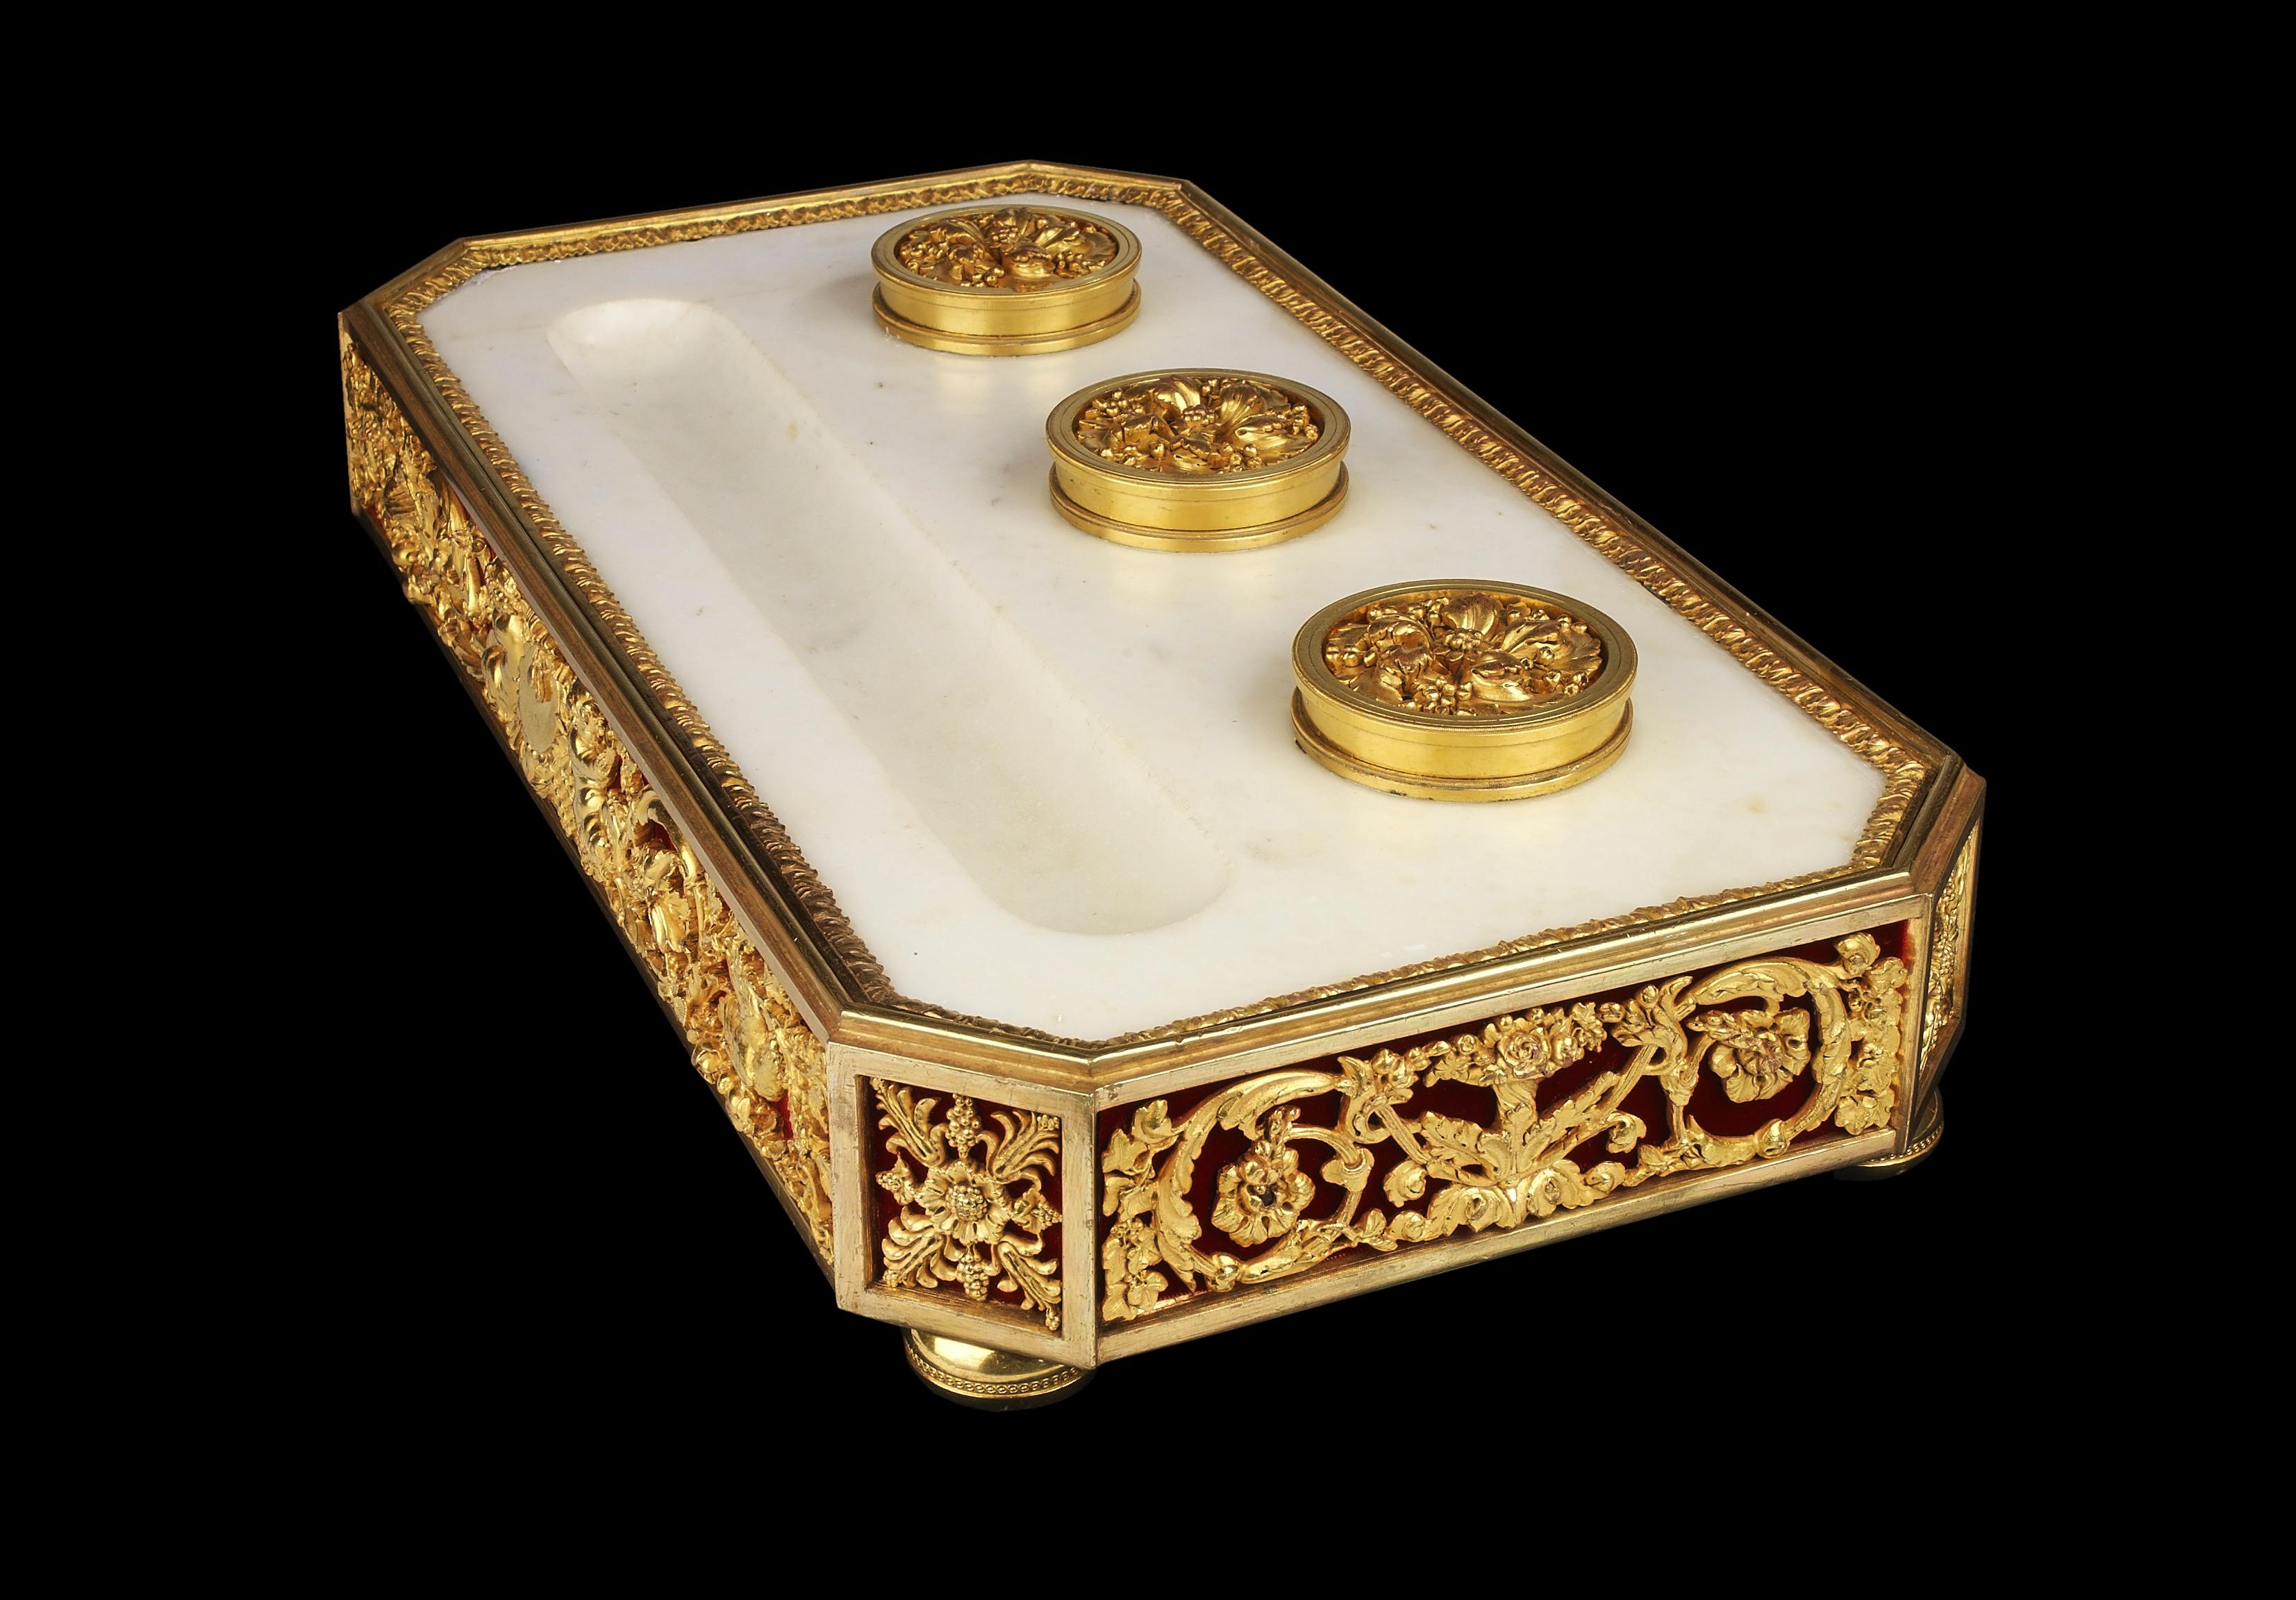 Rectangular white statuary marble inkstand with elaborate gilt bronze mounts applied to the sides backed by red velvet. The surface has three ink containers with ormolu lids and a cutout valley for the pens, resting on ormolu turned bun feet.